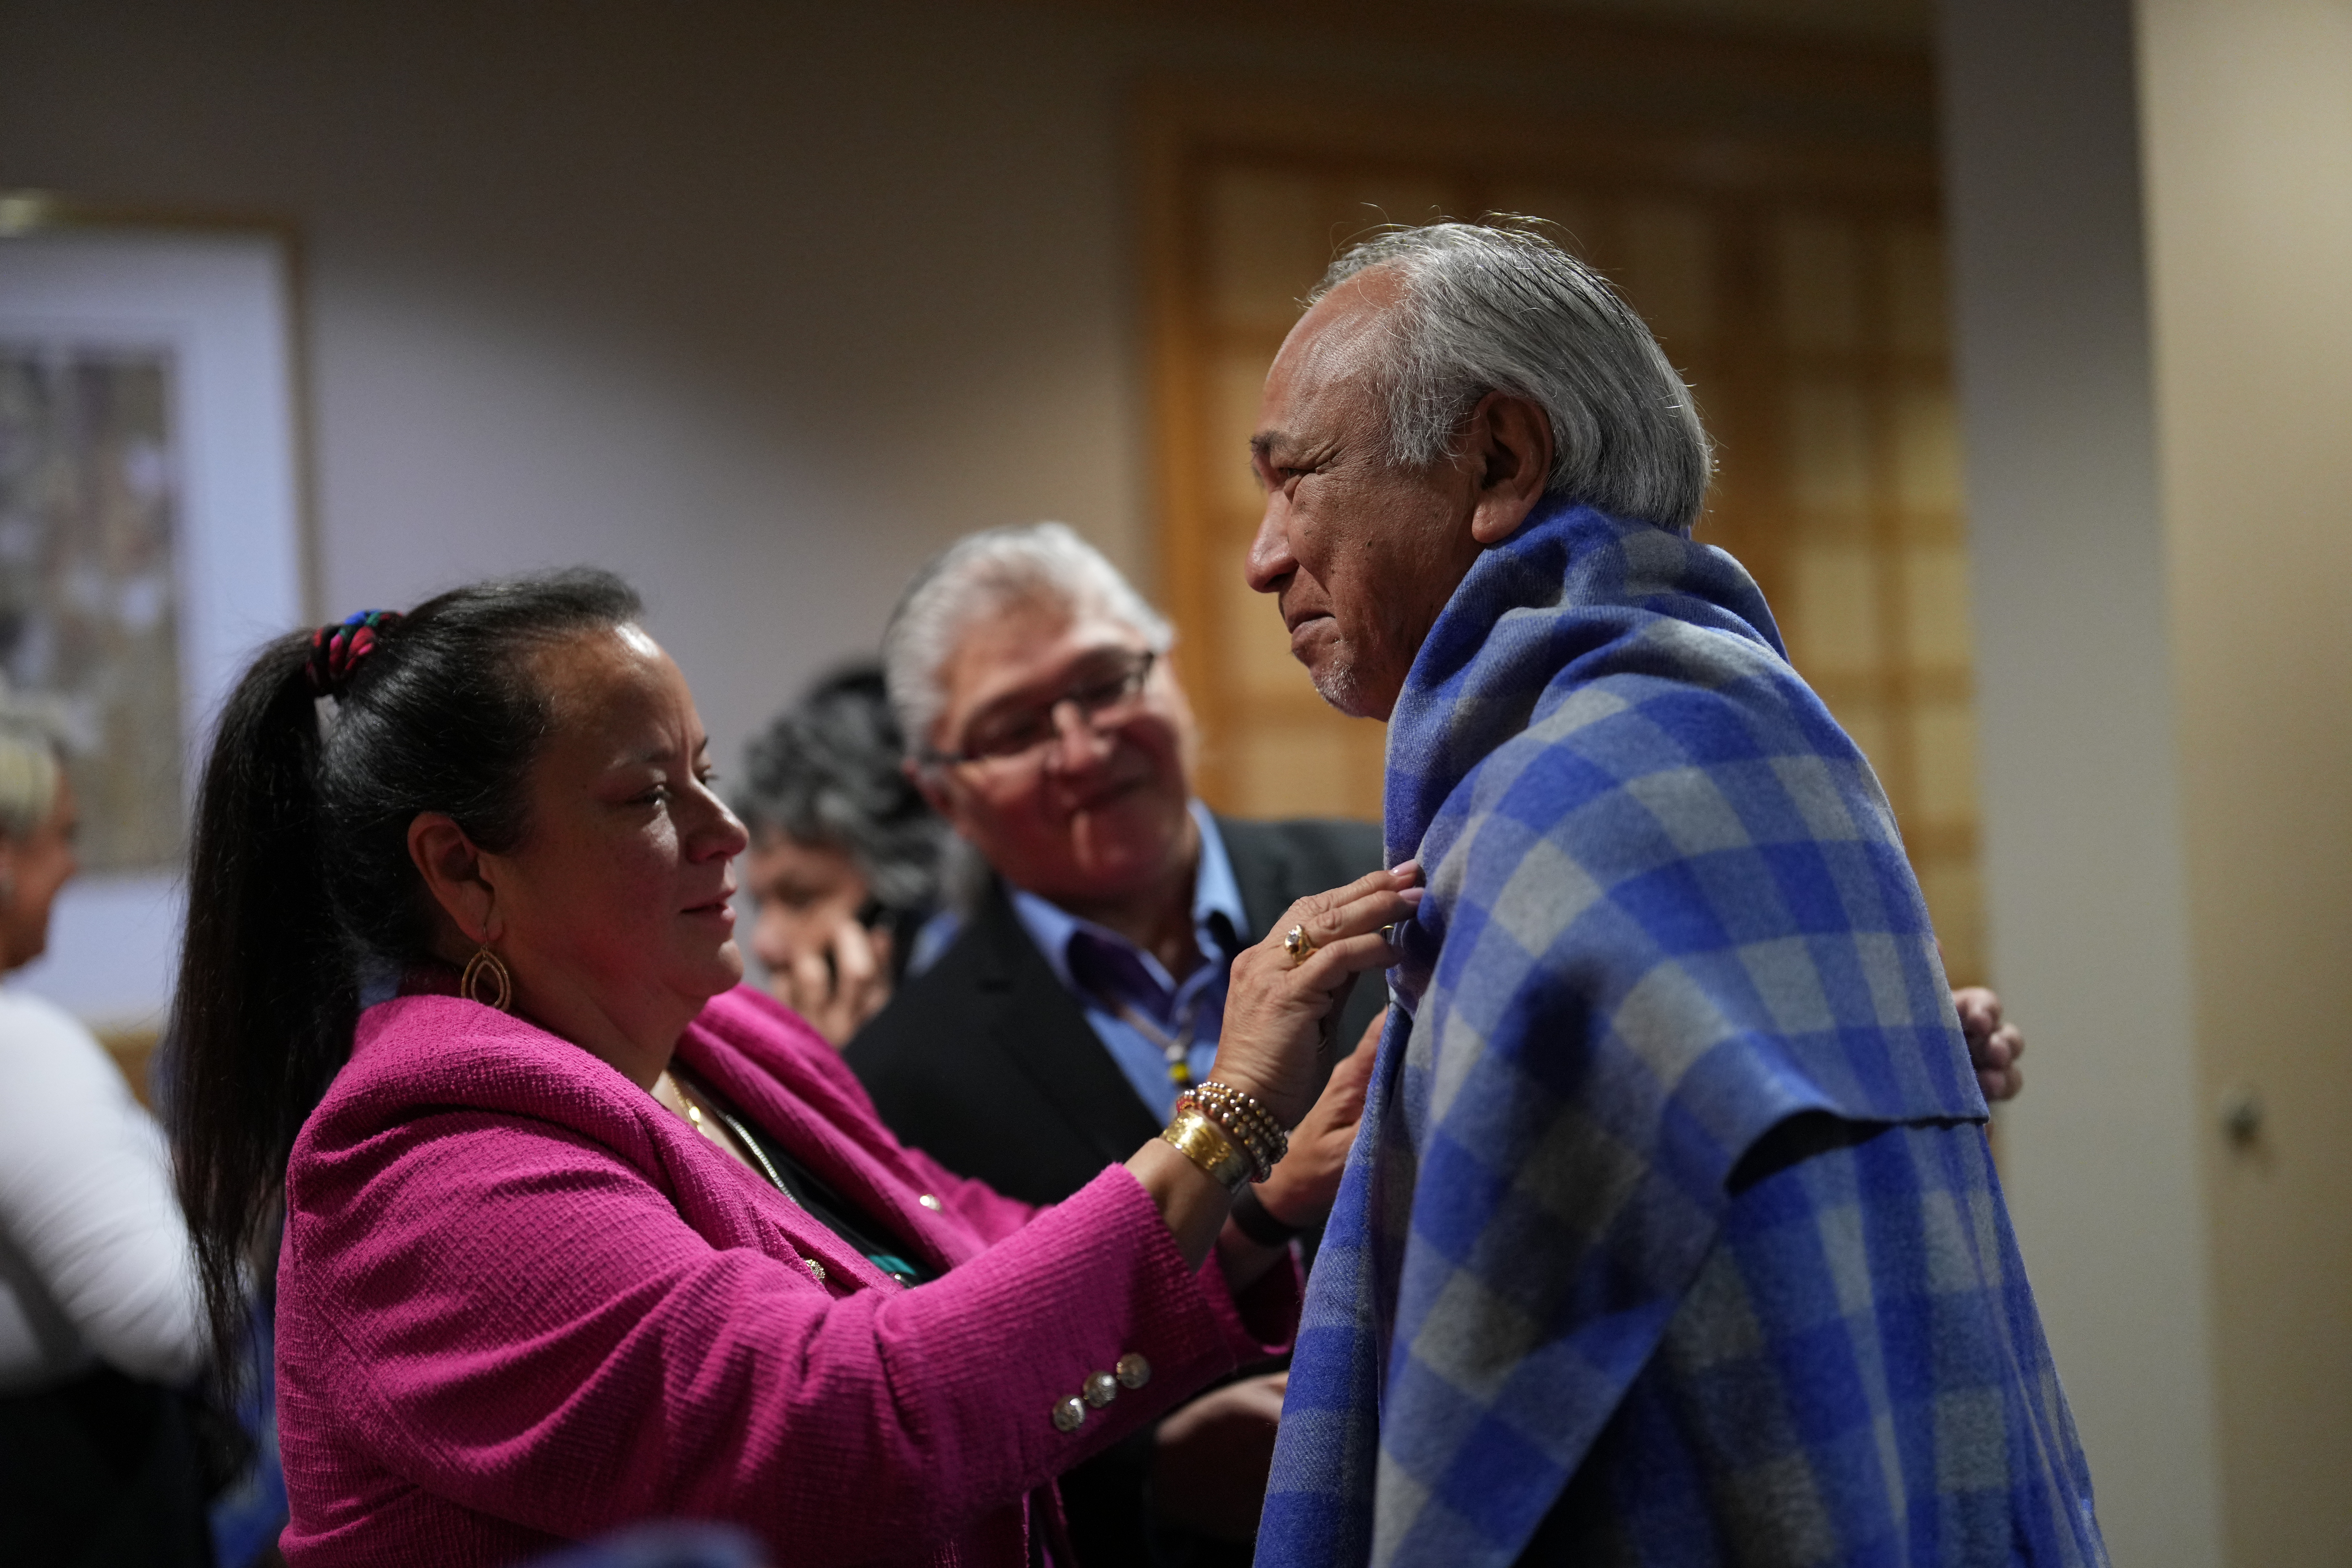 BCFNJC Chair, Kory Wilson and Council Member, Clifford White, blanket Grand Chief Steven Point during the Honouring Ceremony & Feast during the 3rd Annual Justice Forum